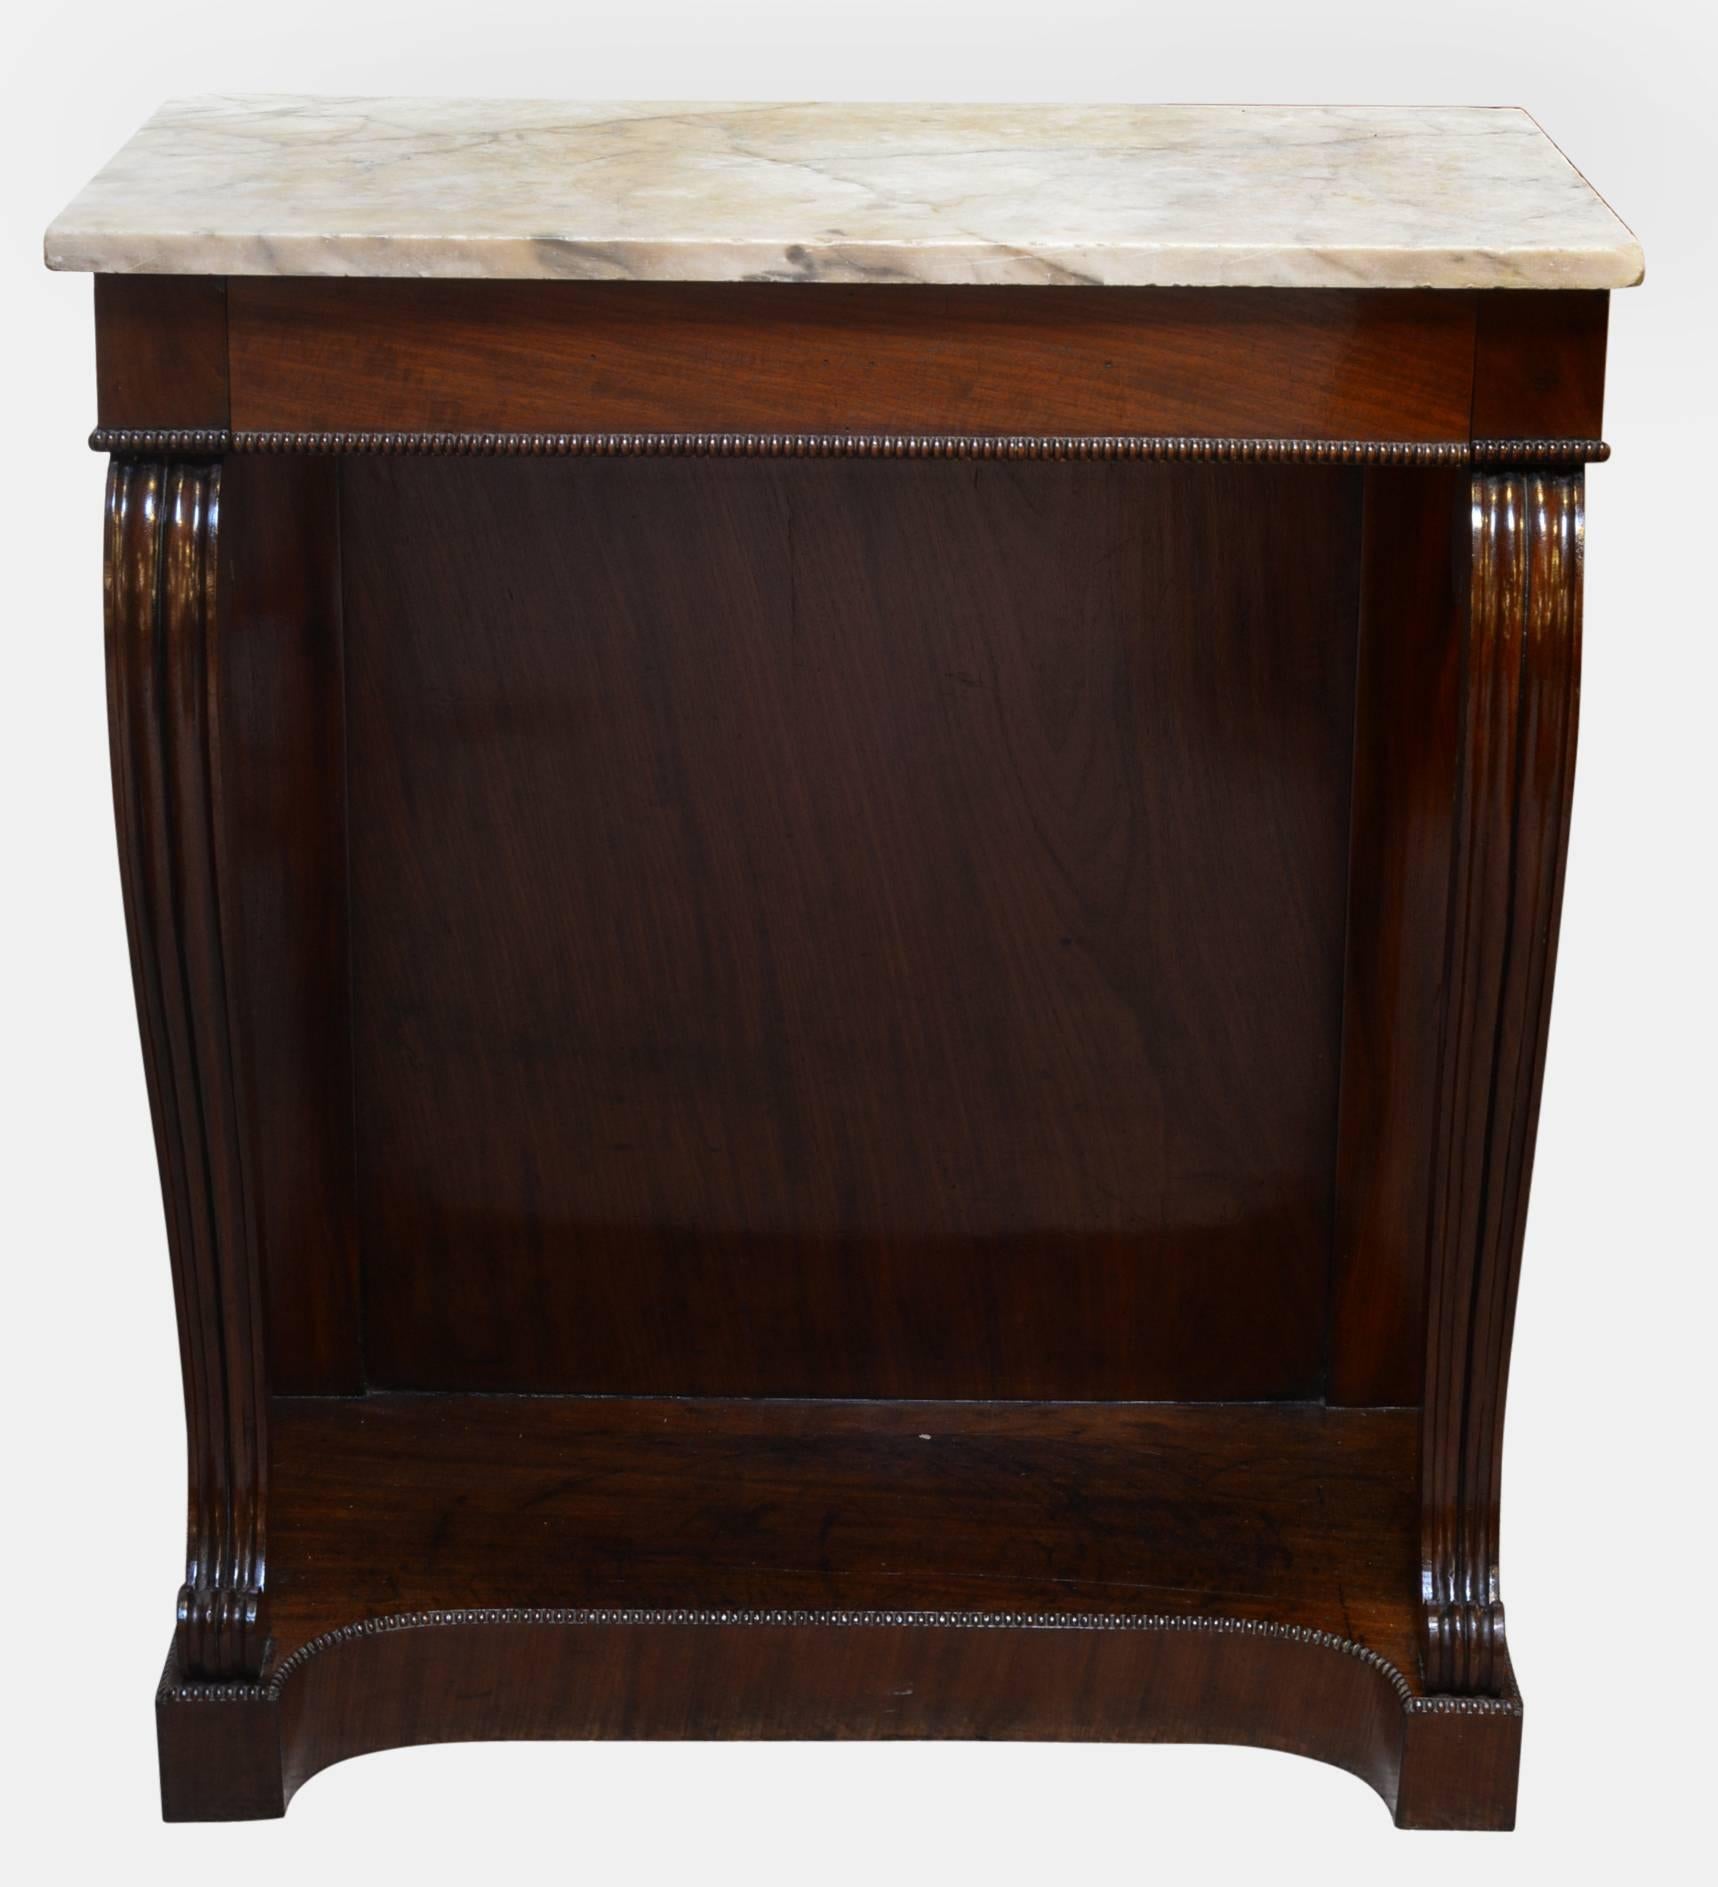 A Regency mahogany console table with marble top and frieze drawer. Supported by scrolling supports on plinth base,

circa 1820.

Measures: 88cm (34.6